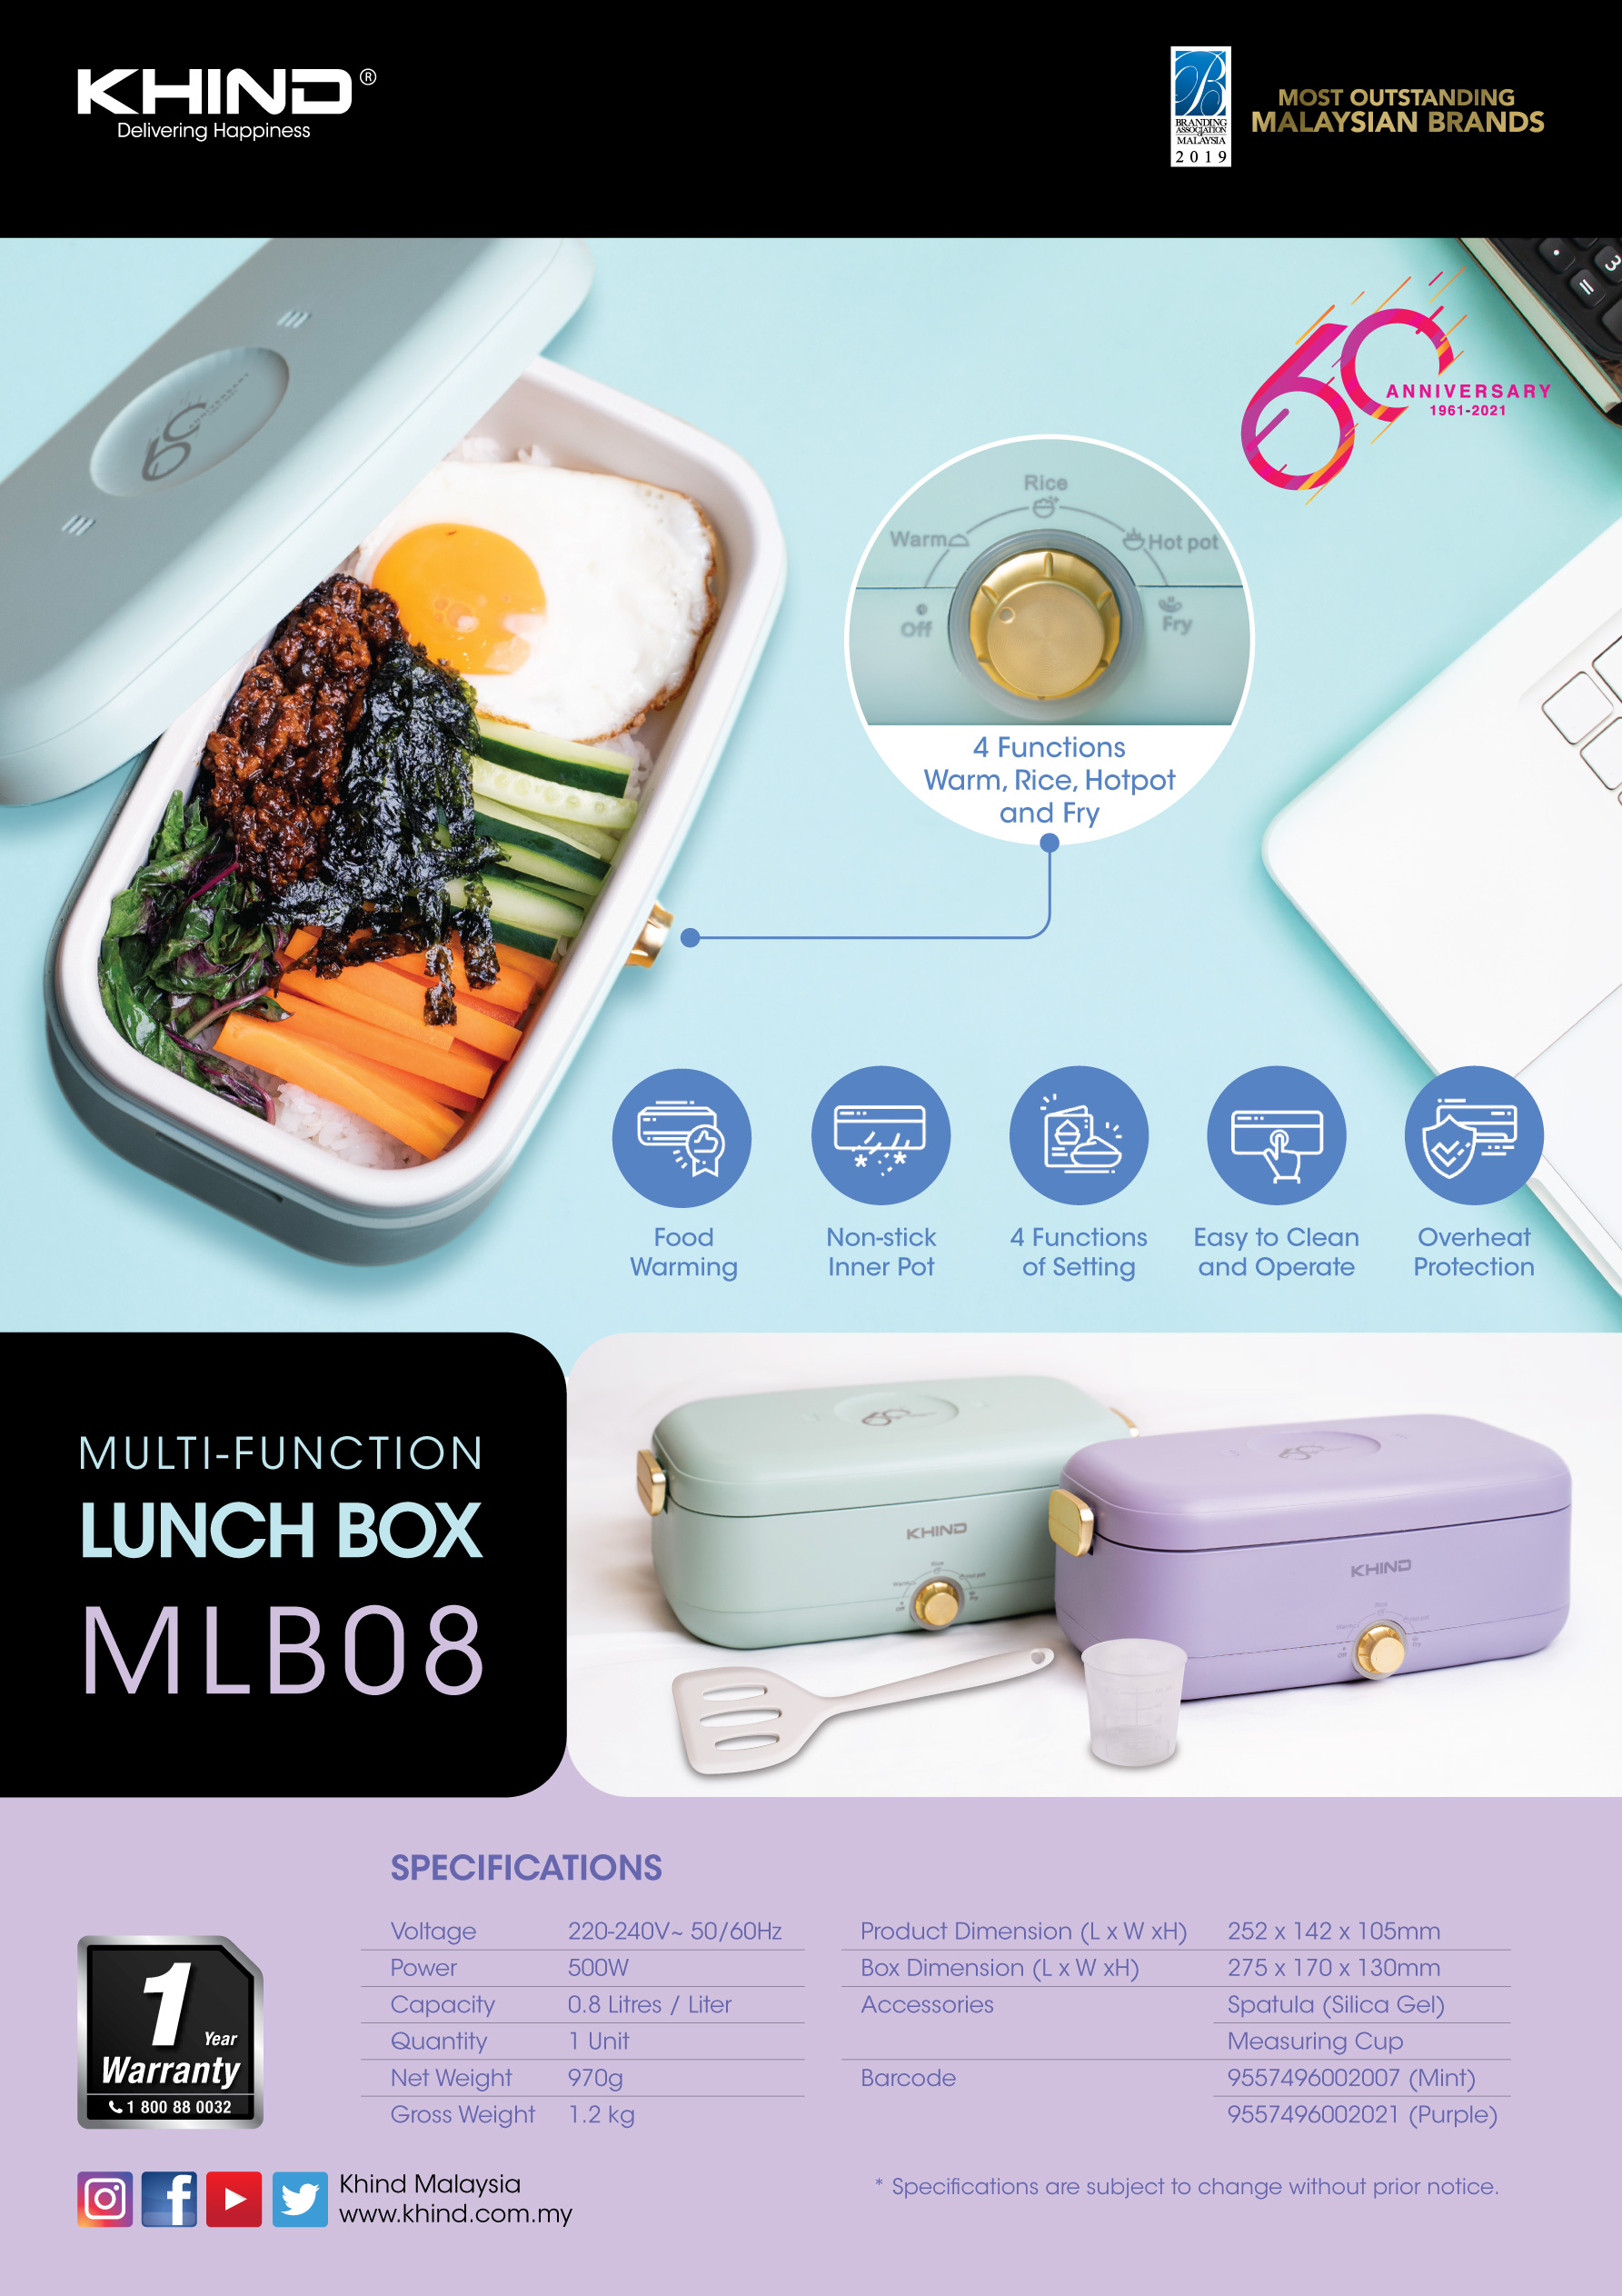 Electric Lunch Box Multifunction Rice Cooker Food Warmer